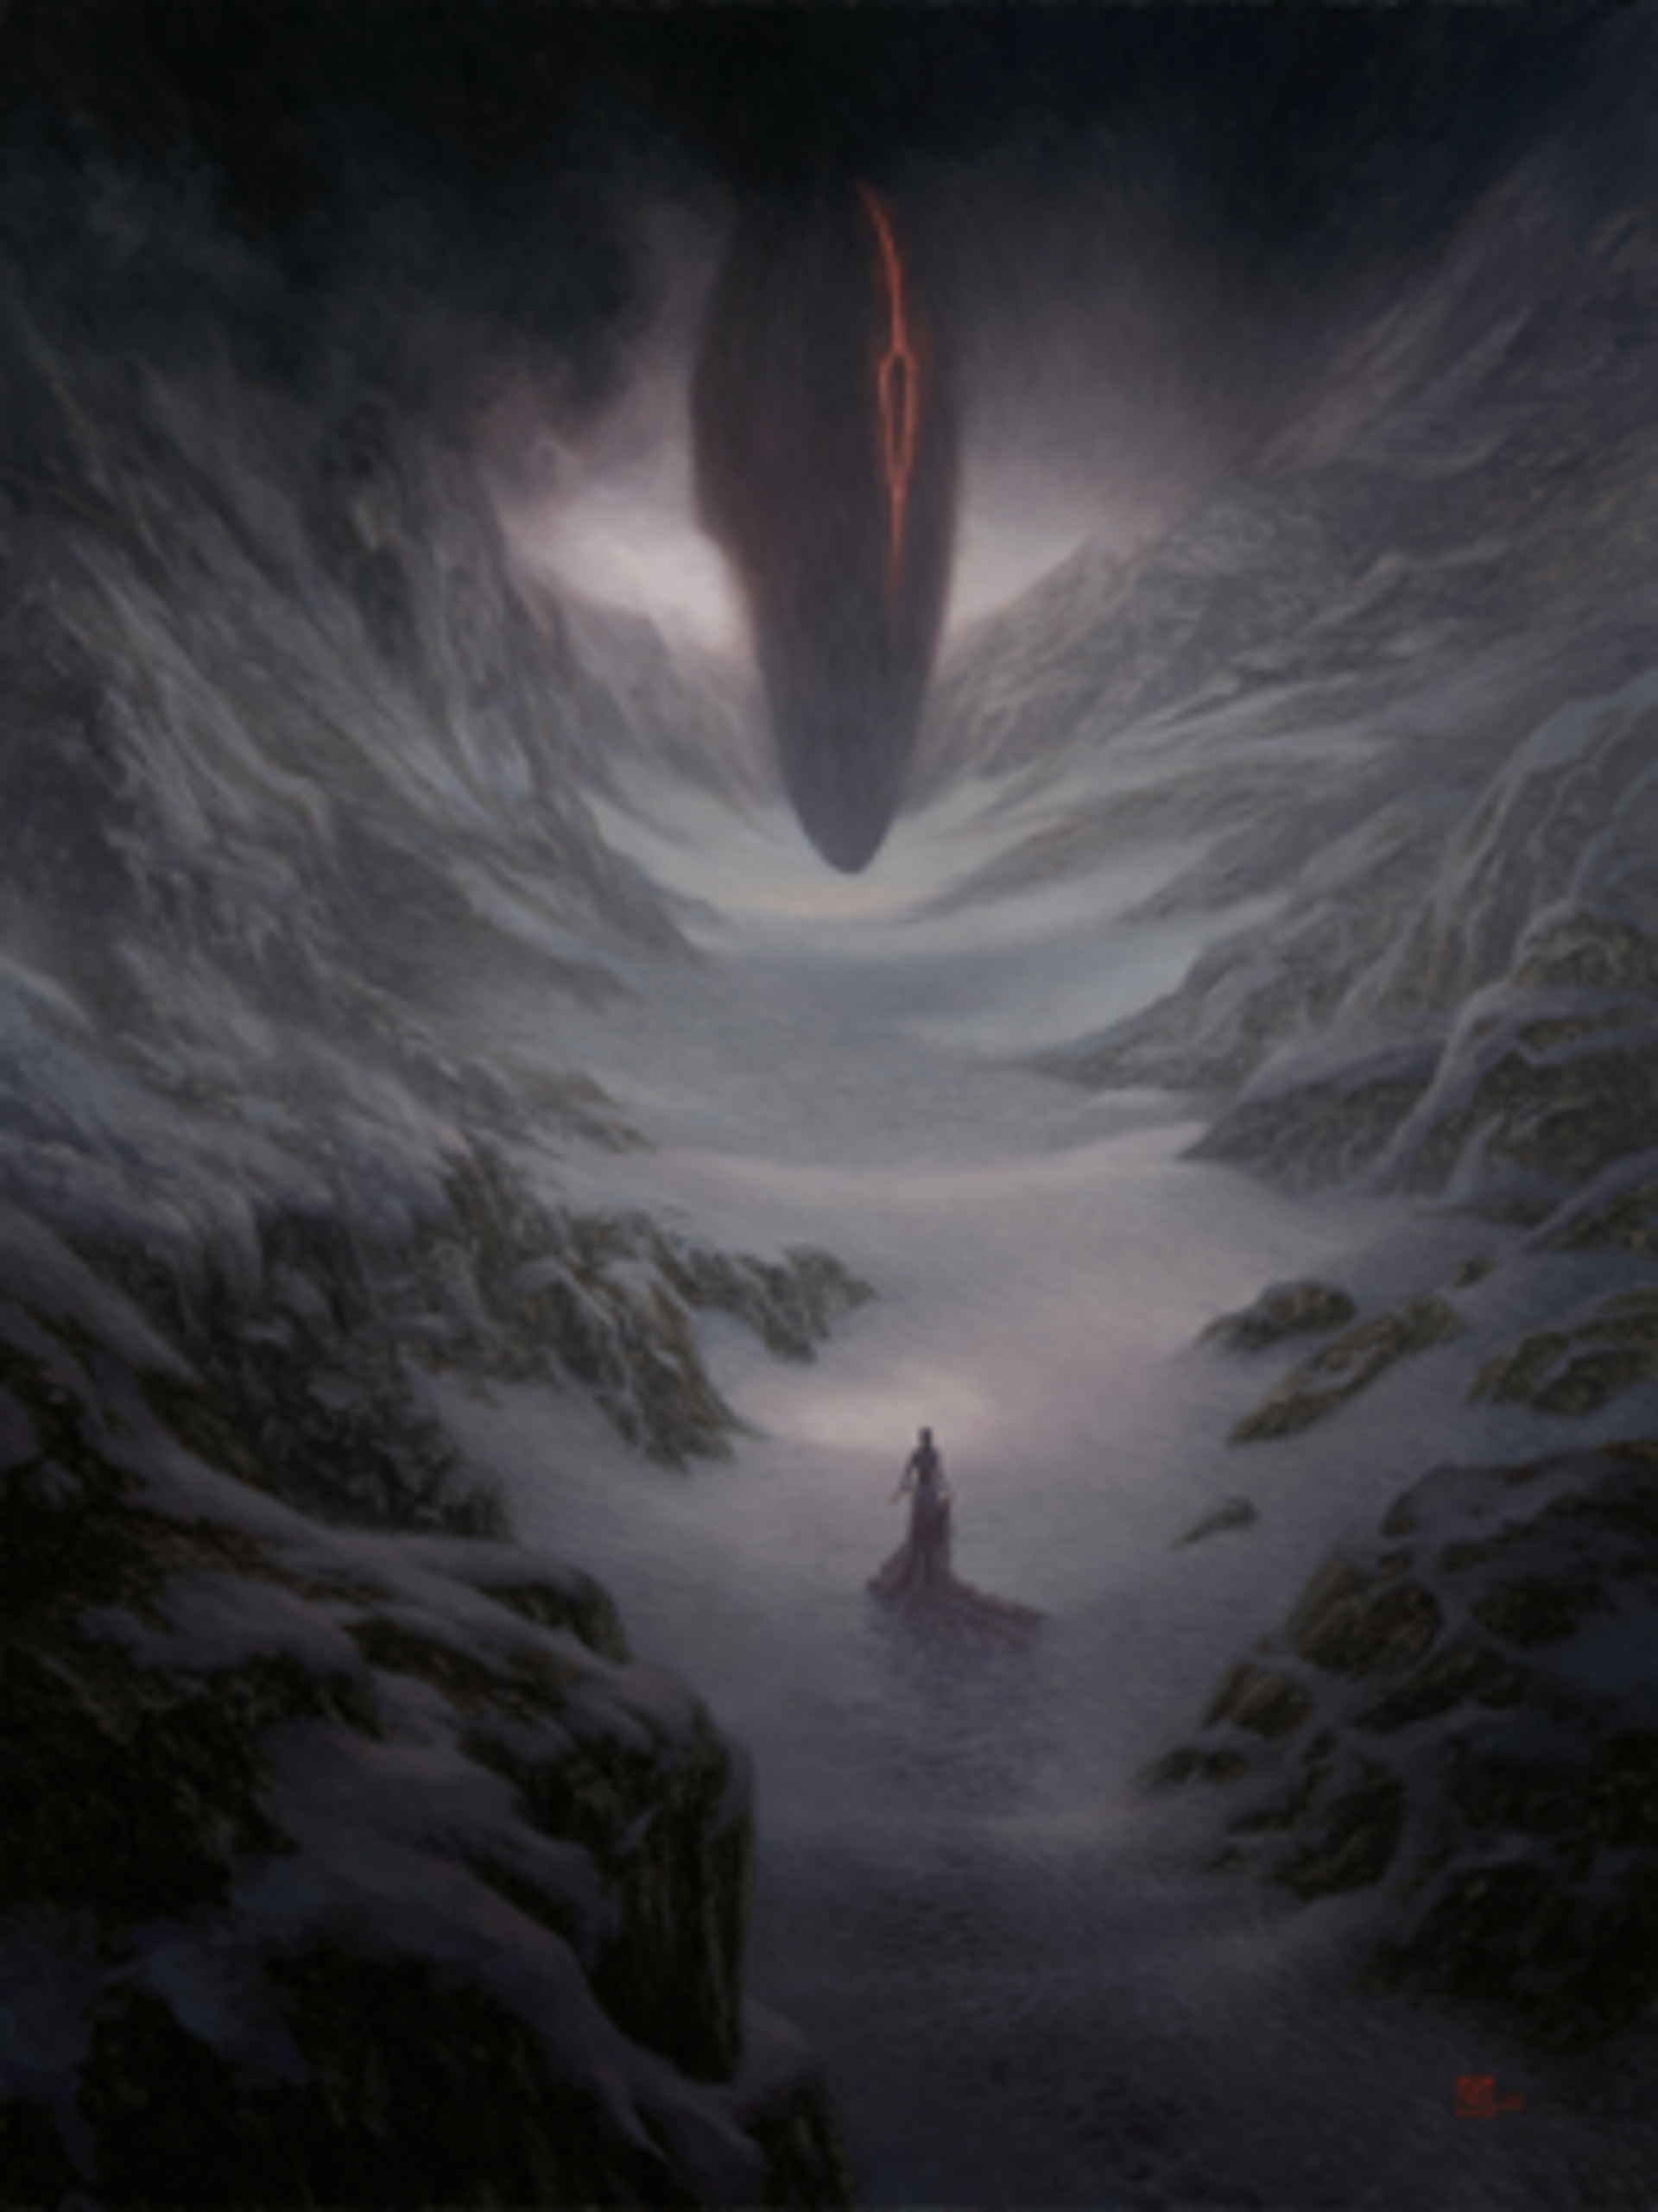 The Bride by Christophe Vacher